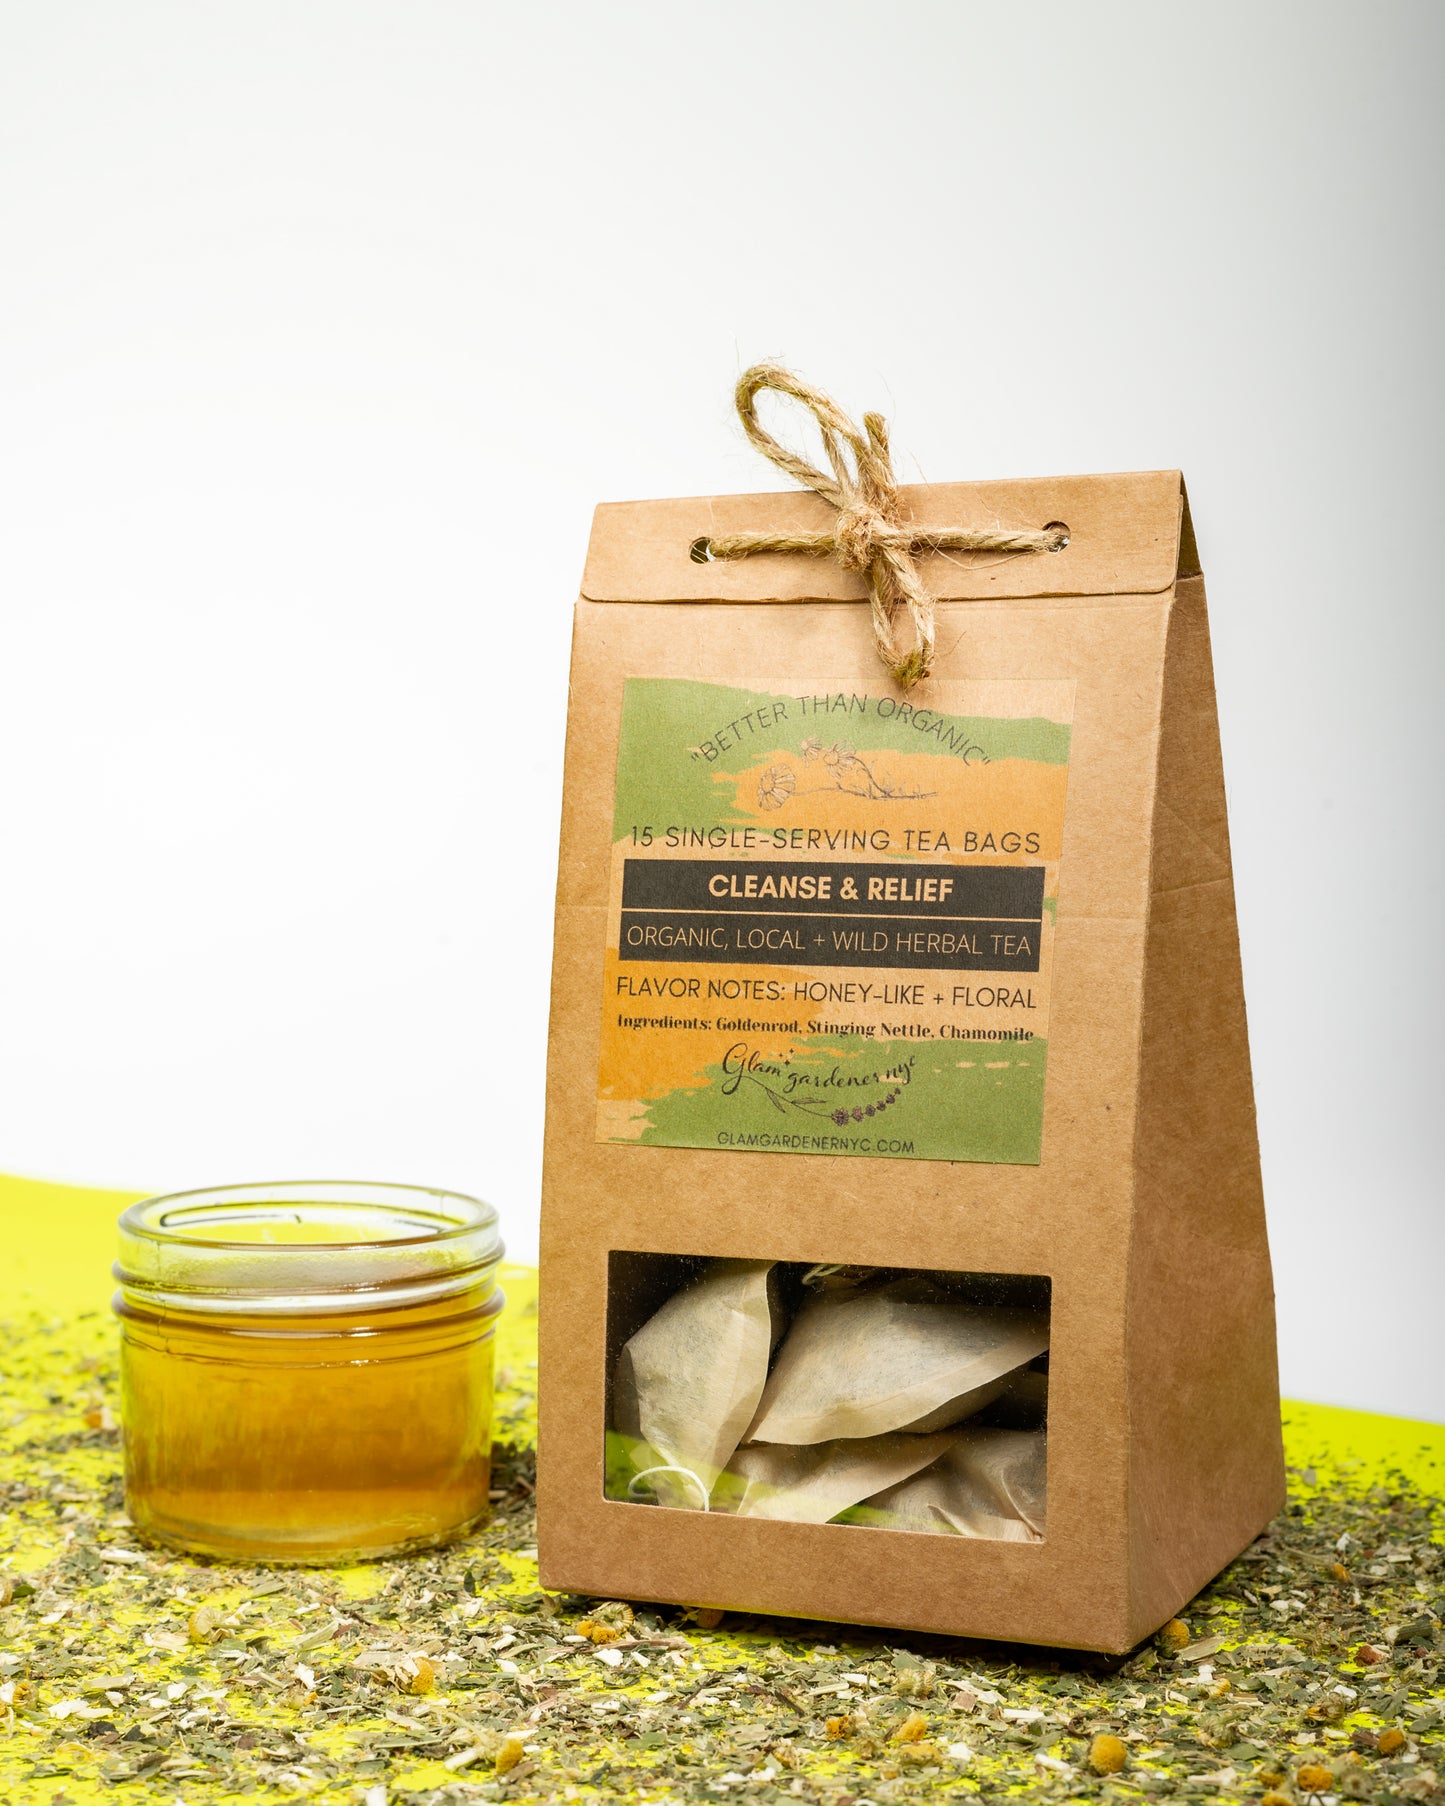 Cleanse + relief tea bagged herbal tea (designed to cleanse)